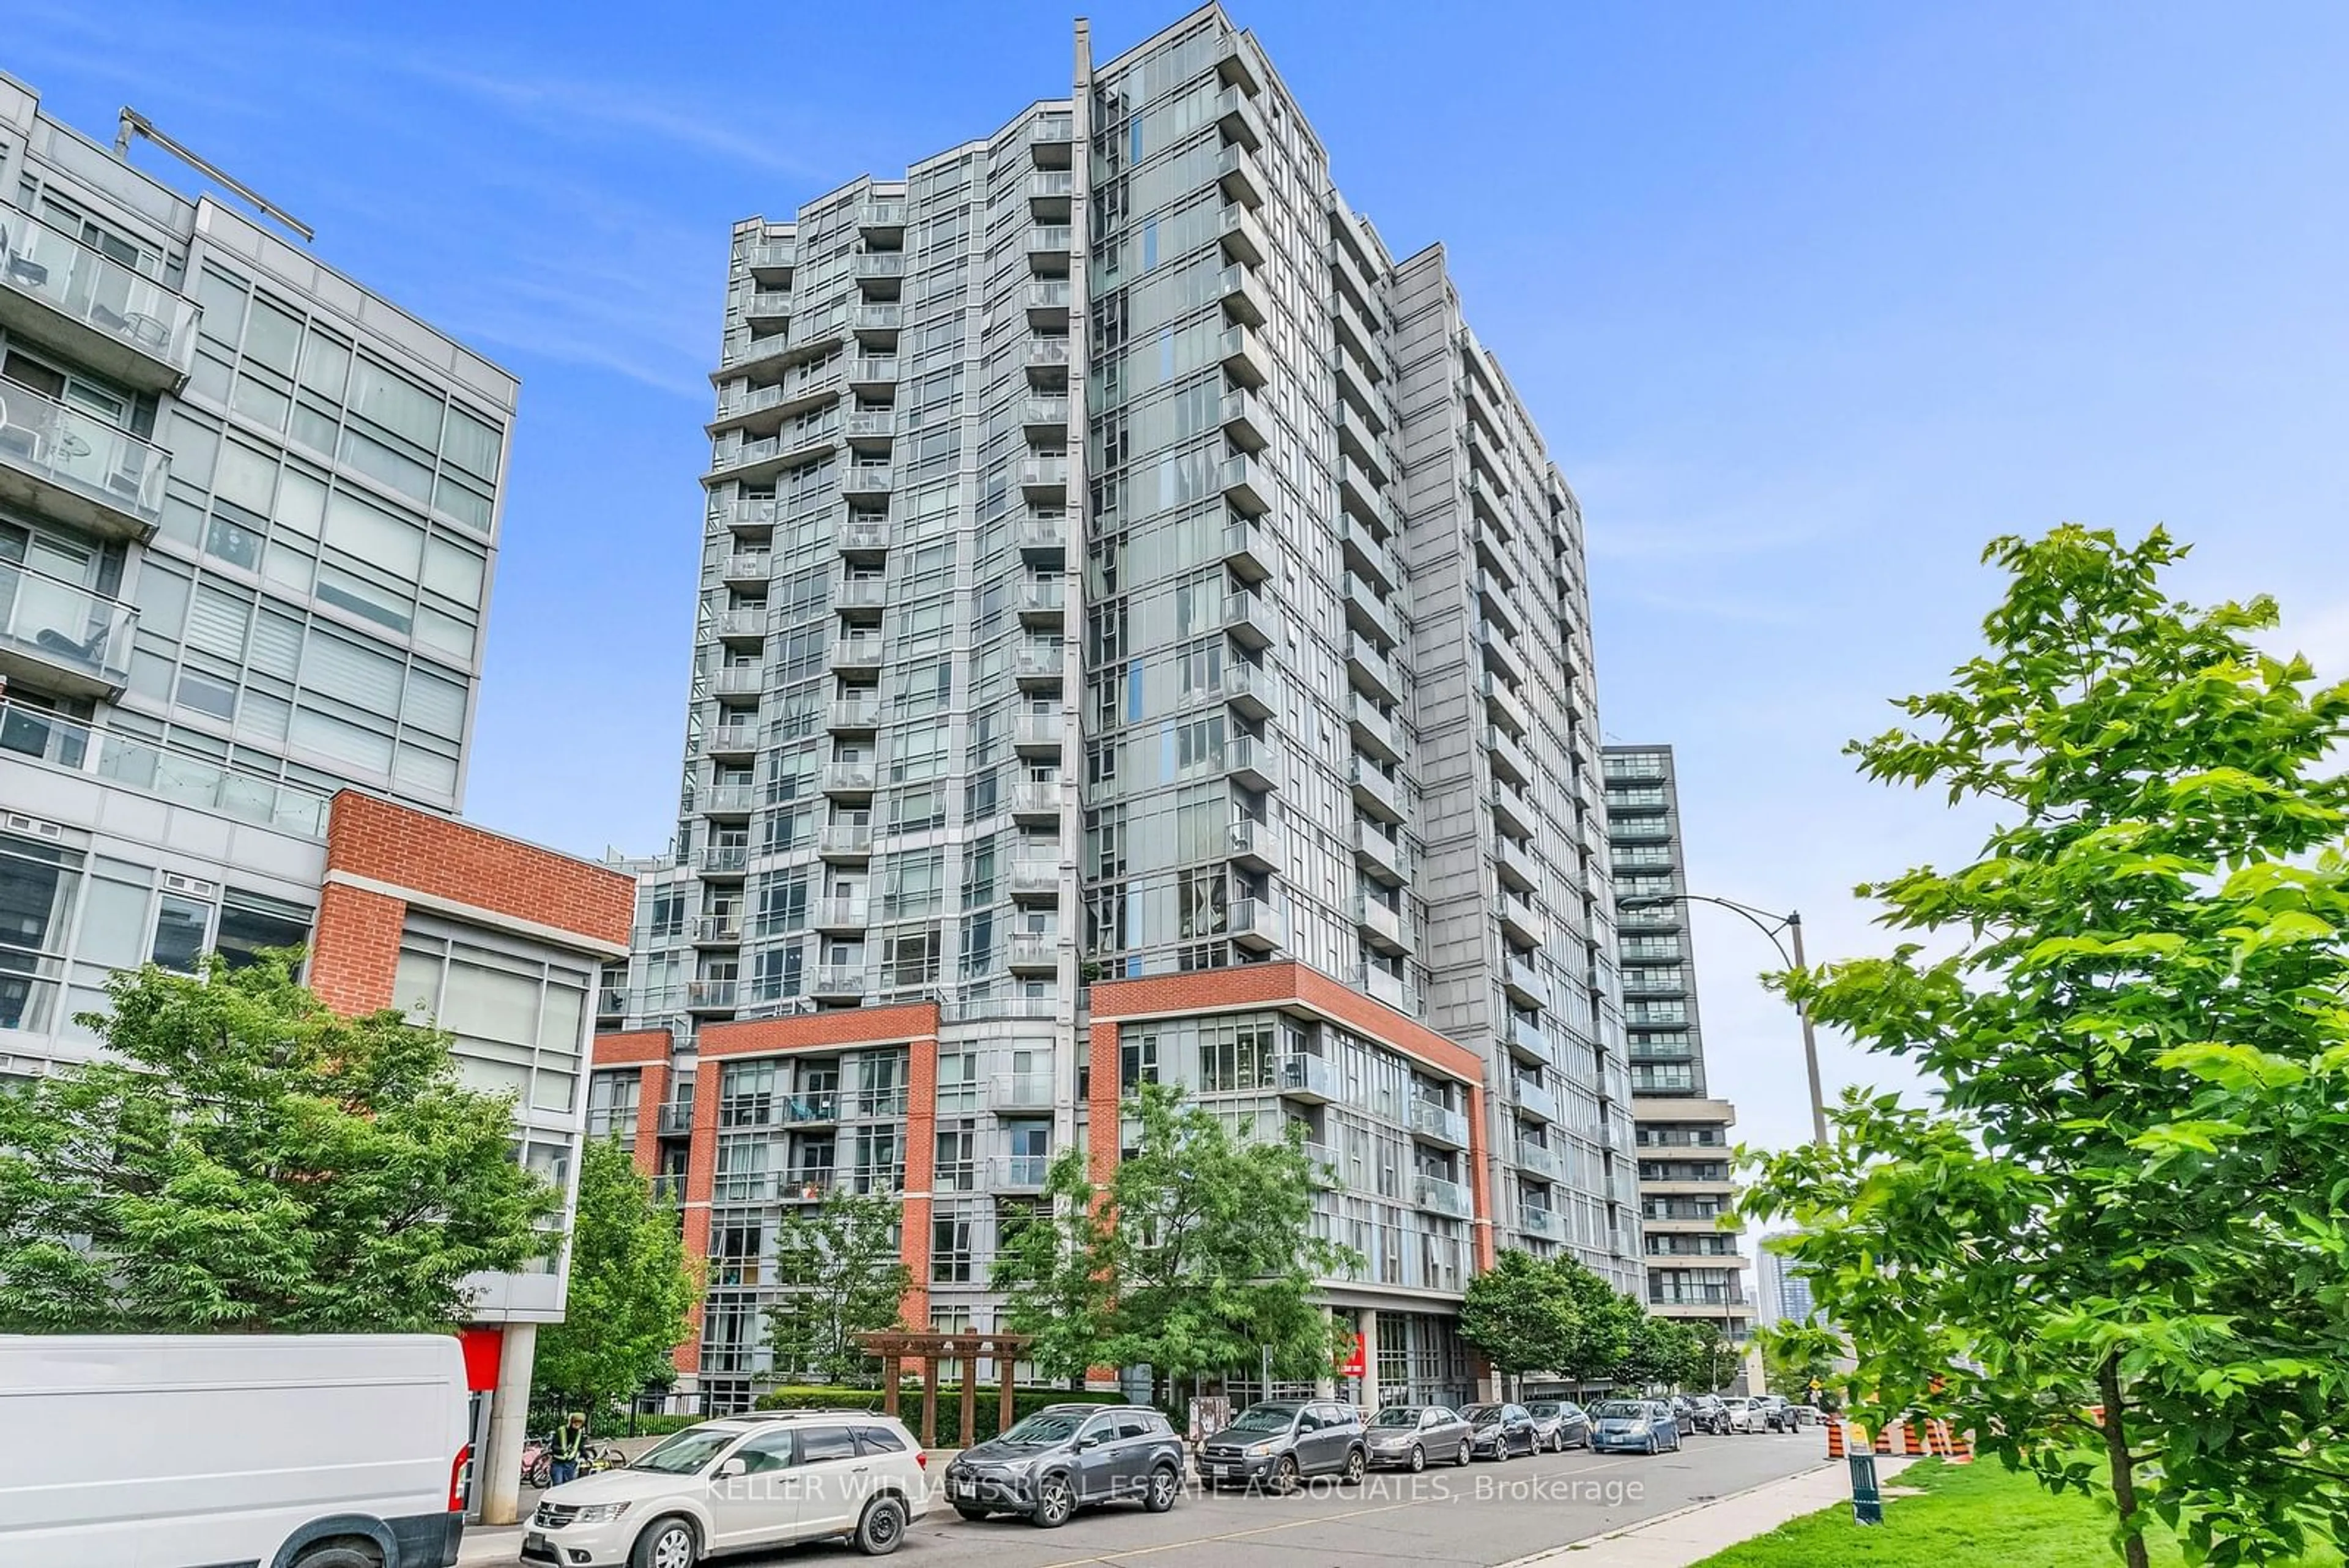 A pic from exterior of the house or condo for 150 Sudbury St #1308, Toronto Ontario M6J 3S8